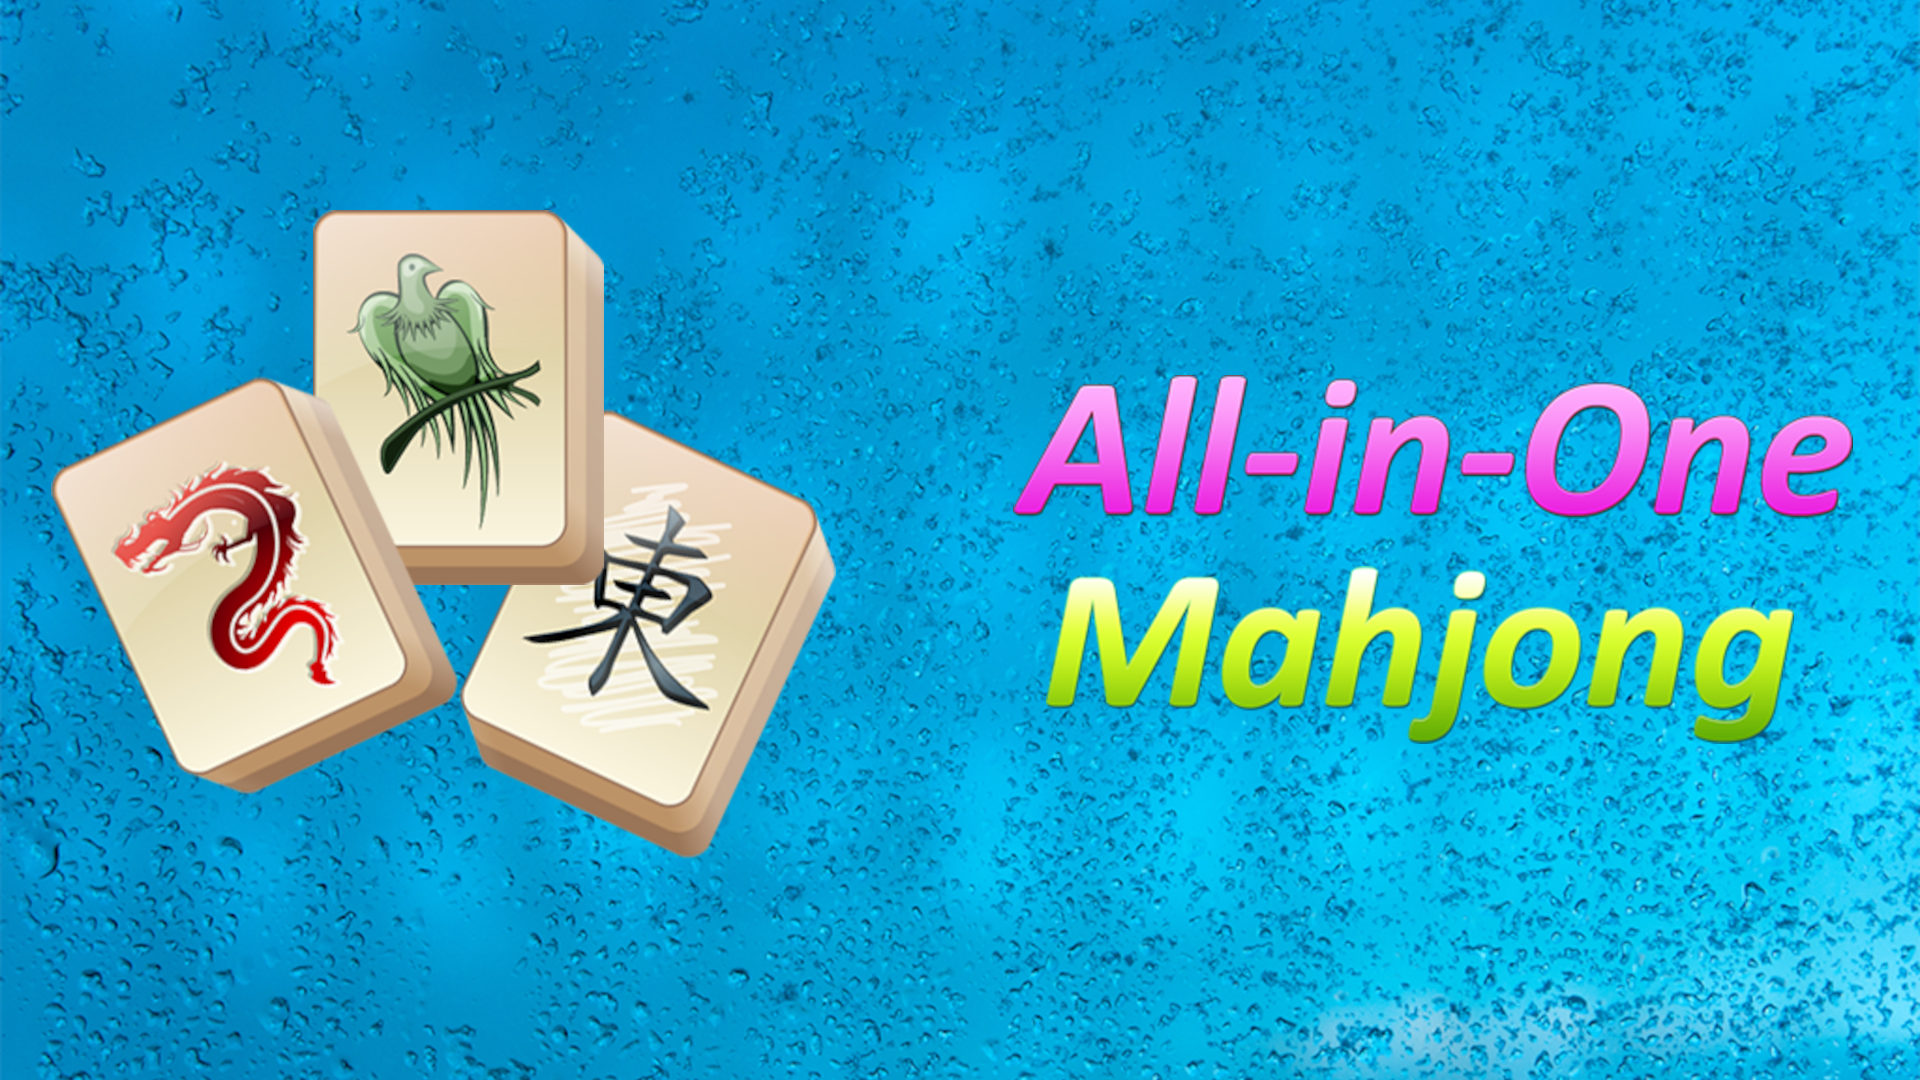 Get Mahjong Solitaire (Free) - Microsoft Store